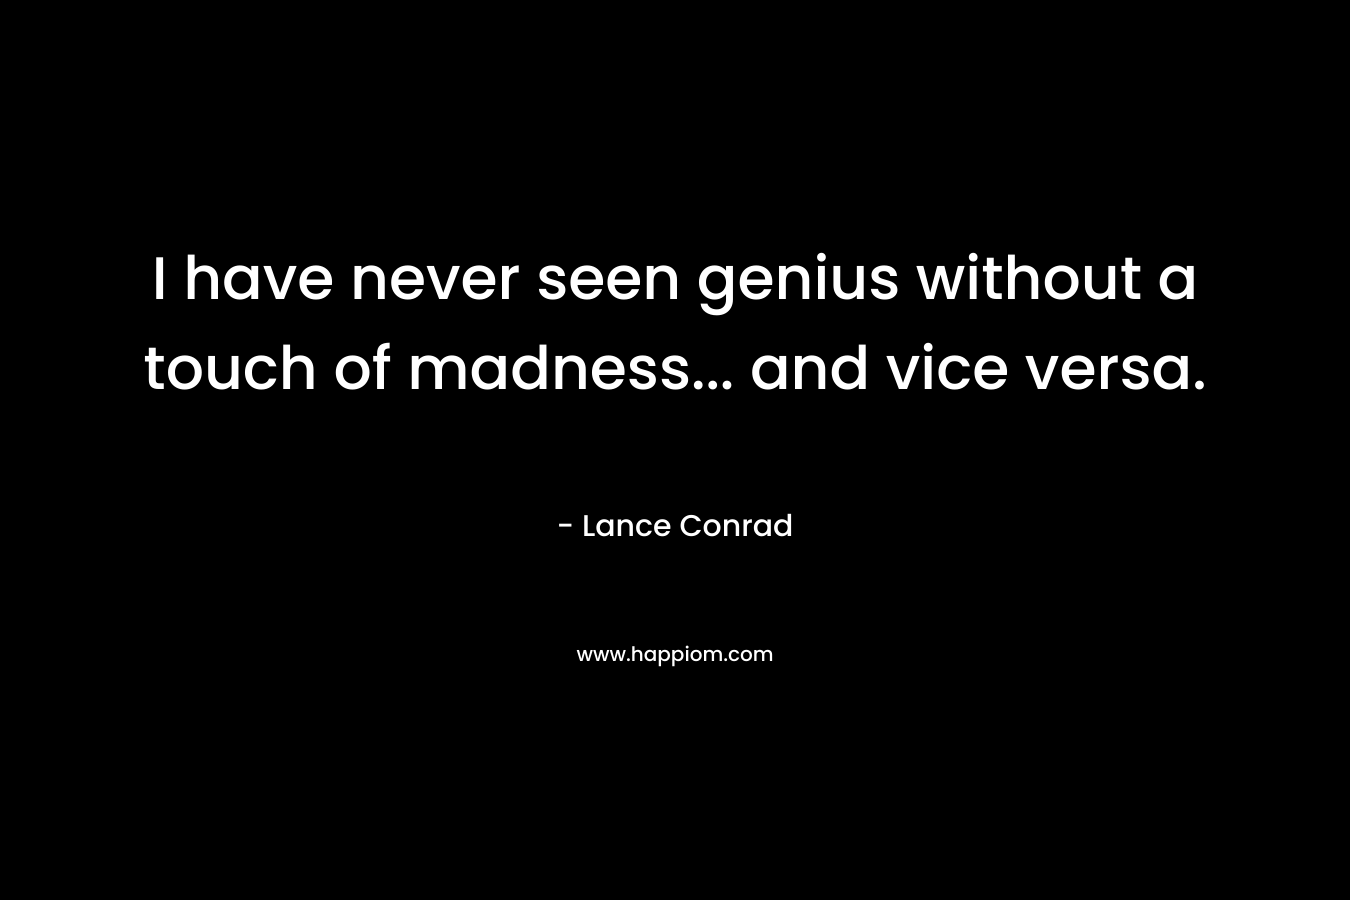 I have never seen genius without a touch of madness... and vice versa.